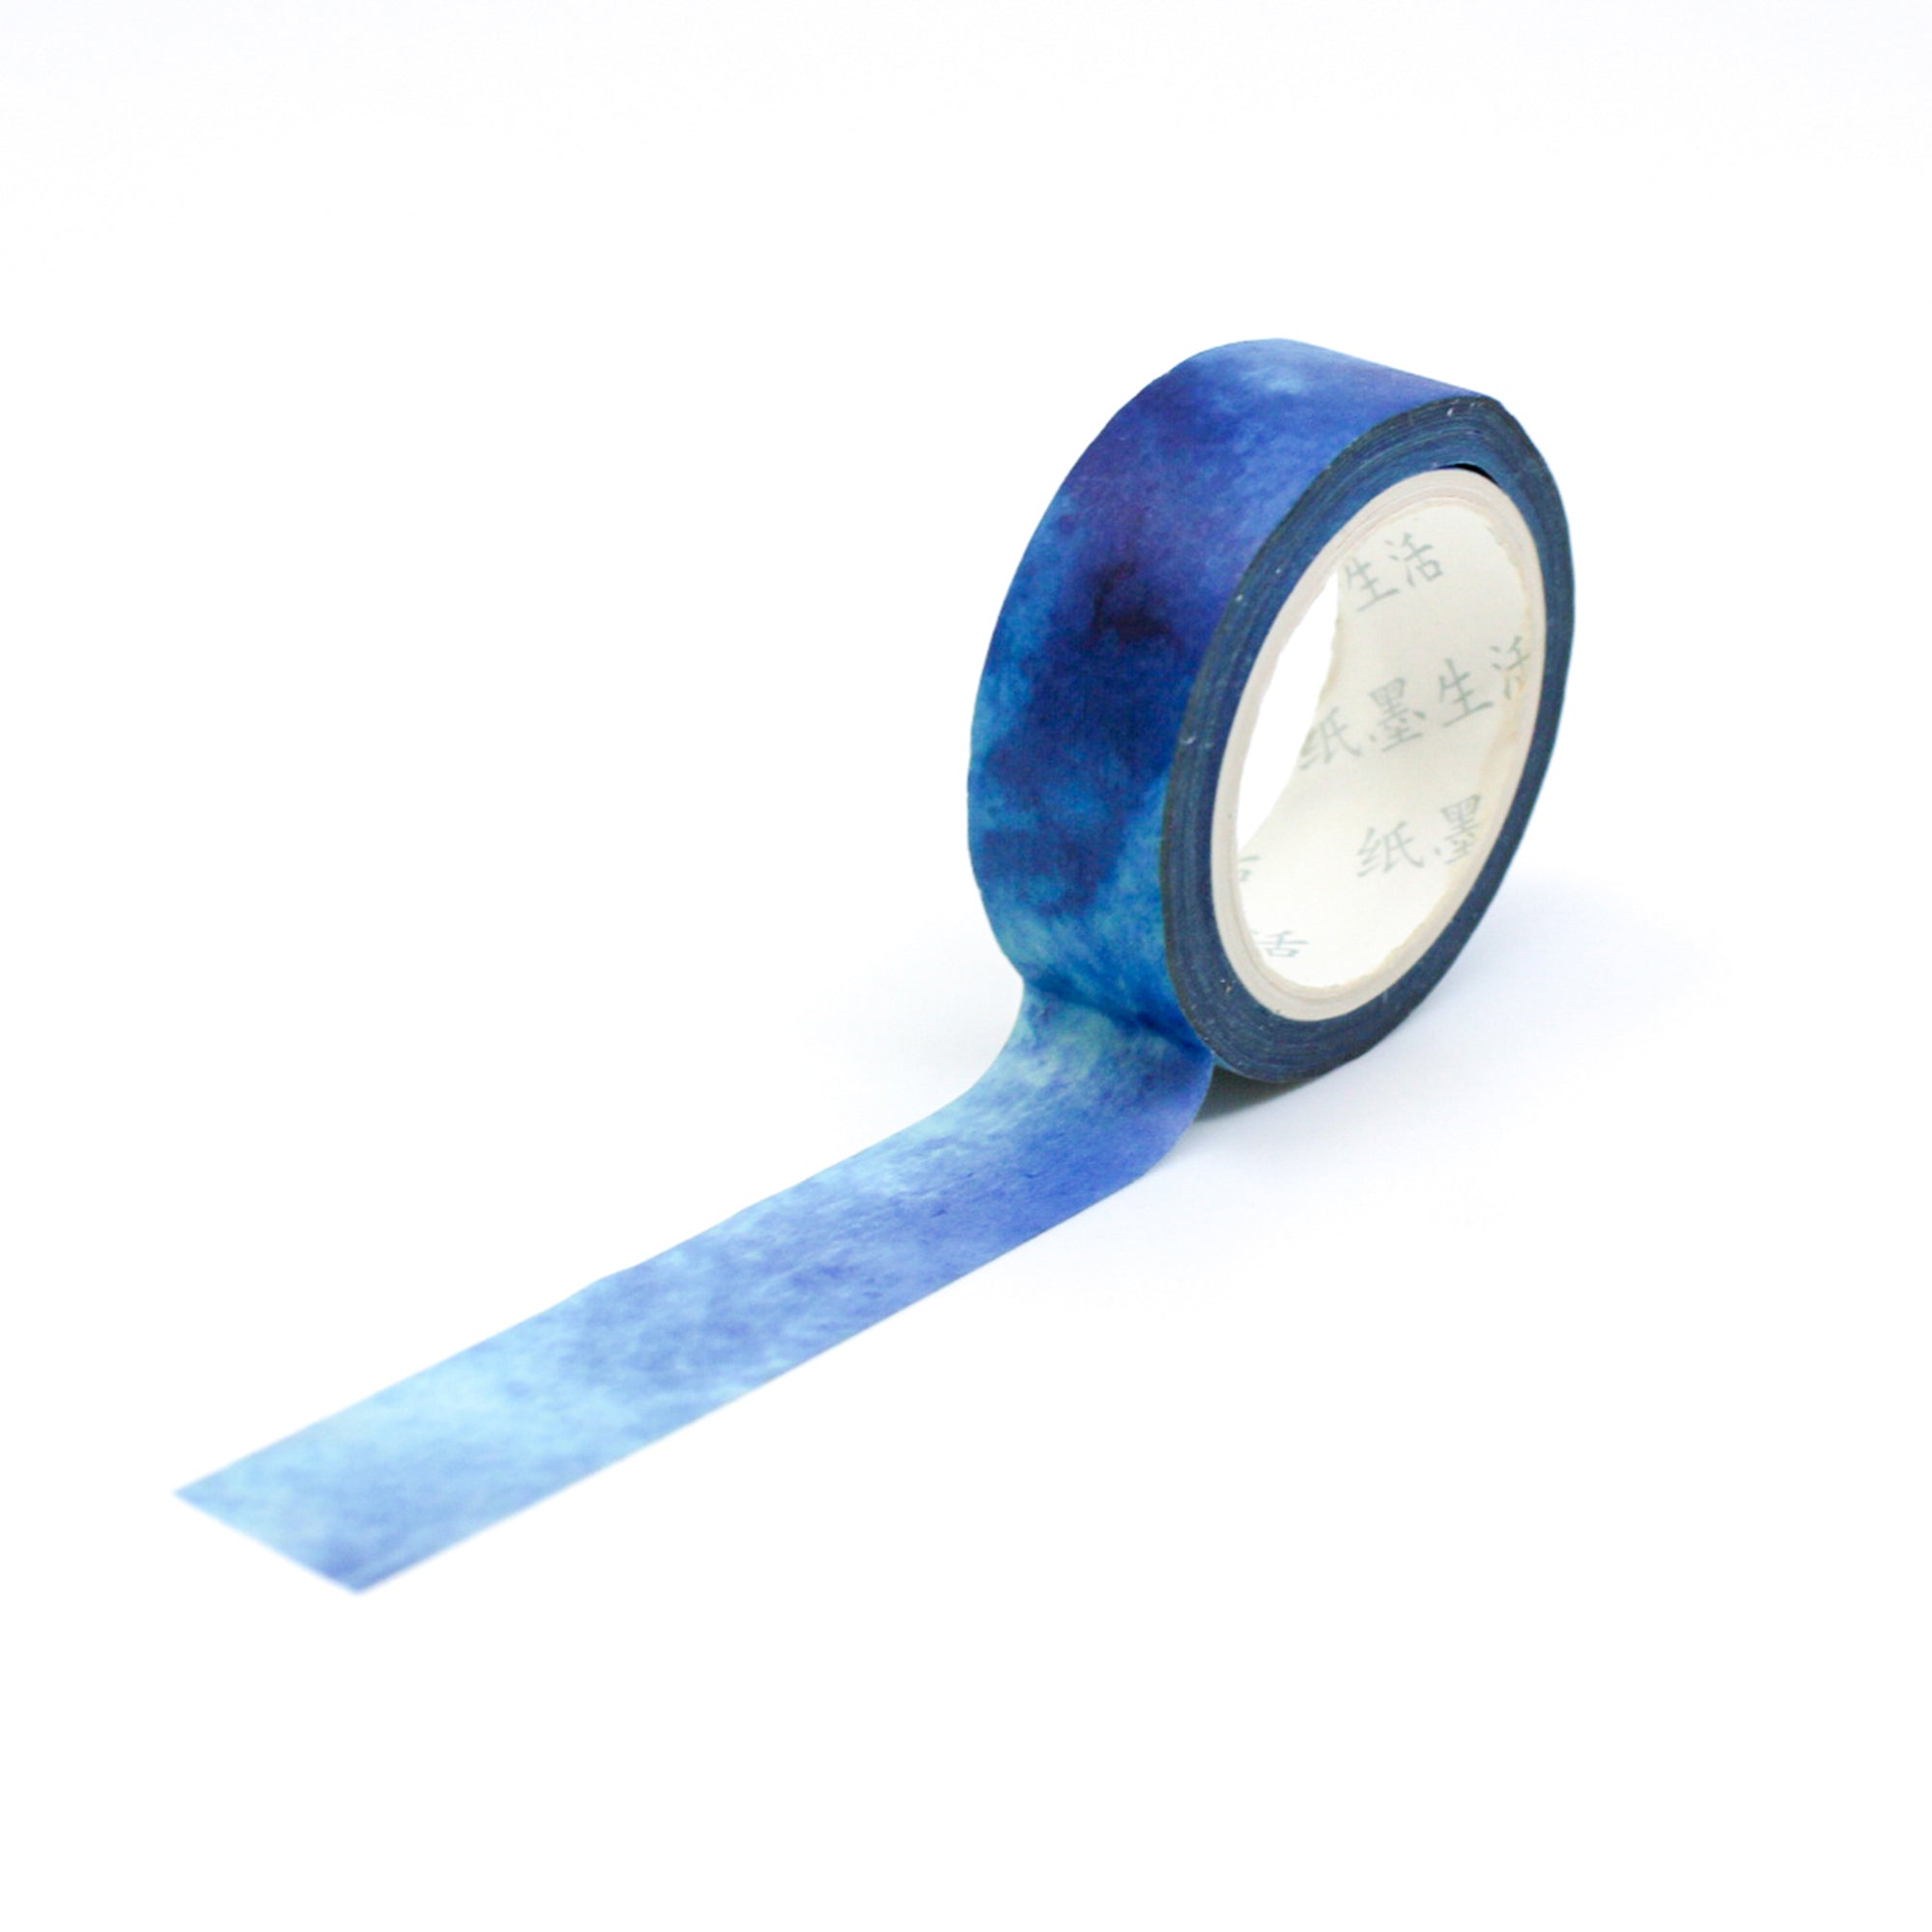 This bright turquoise-blue sky watercolor washi tape is the perfect addition to your washi collection. The simplicity of the pattern is perfect for accenting and matching any project's theme while adding a beautiful and interesting pattern. This tape is sold at BBB Supplies Craft Shop.